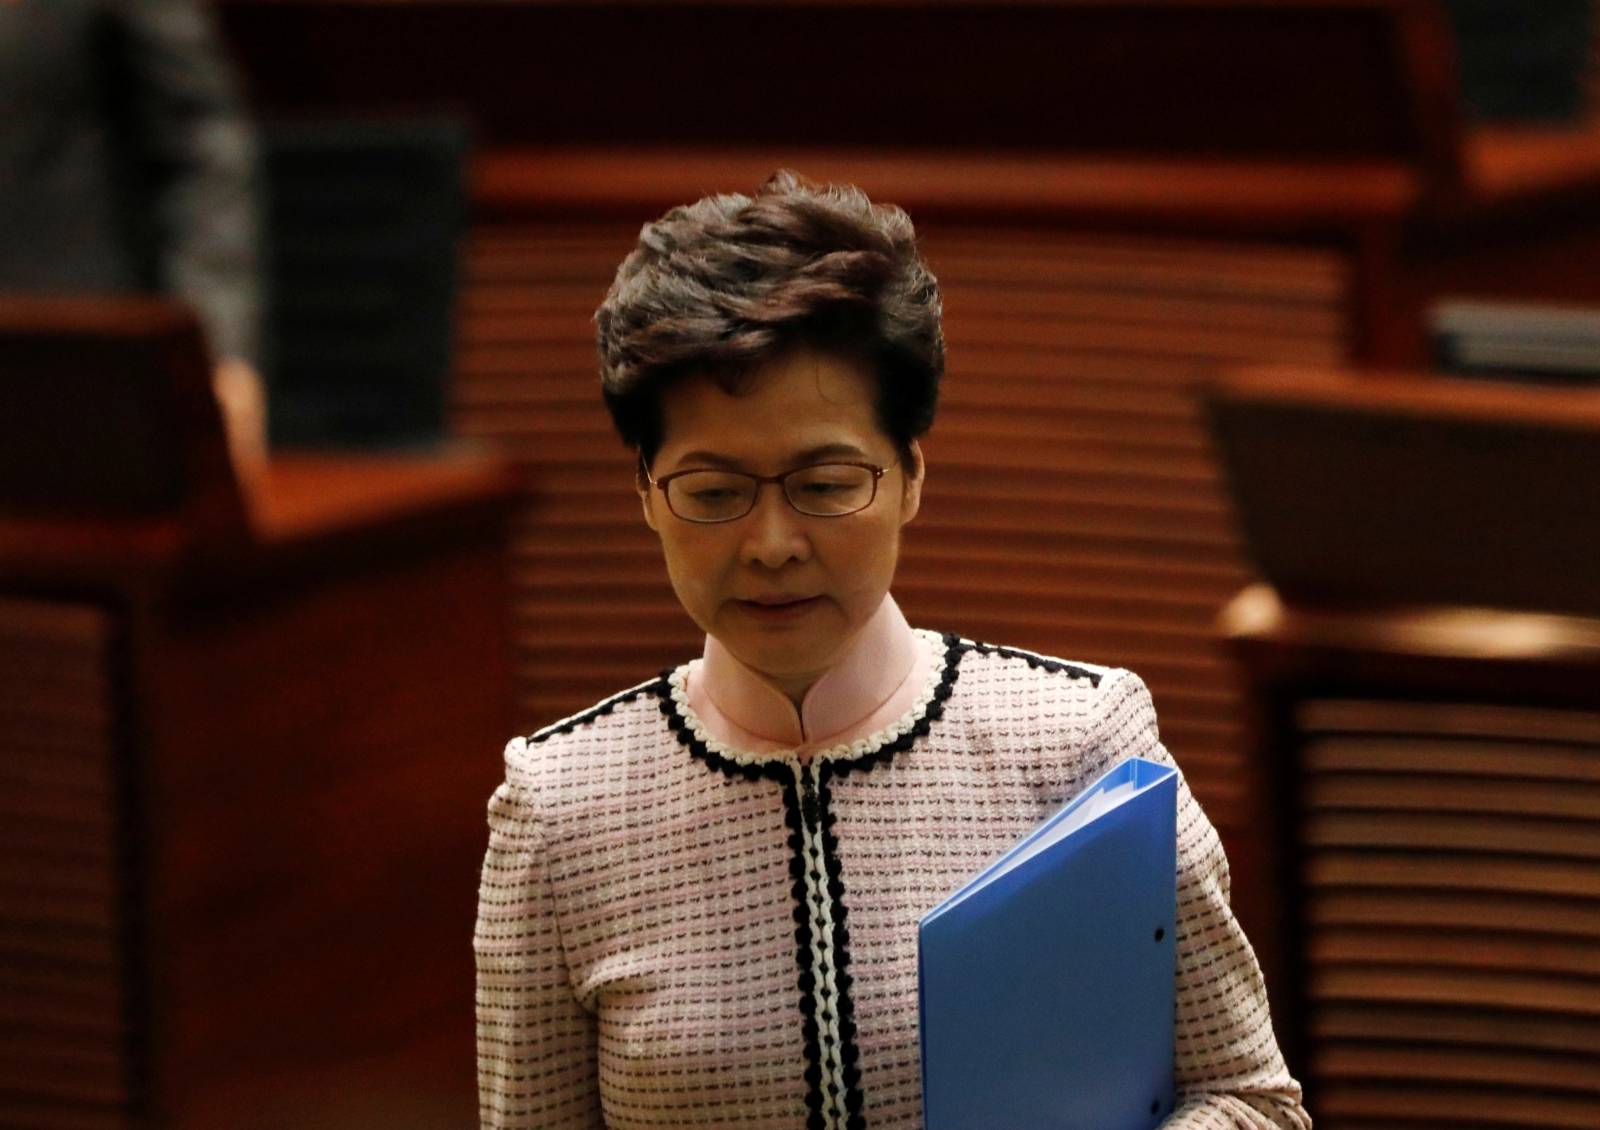 Hong Kong Chief Executive Carrie Lam reacts as lawmakers shout slogans, disrupting her annual policy address at the Legislative Council in Hong Kong